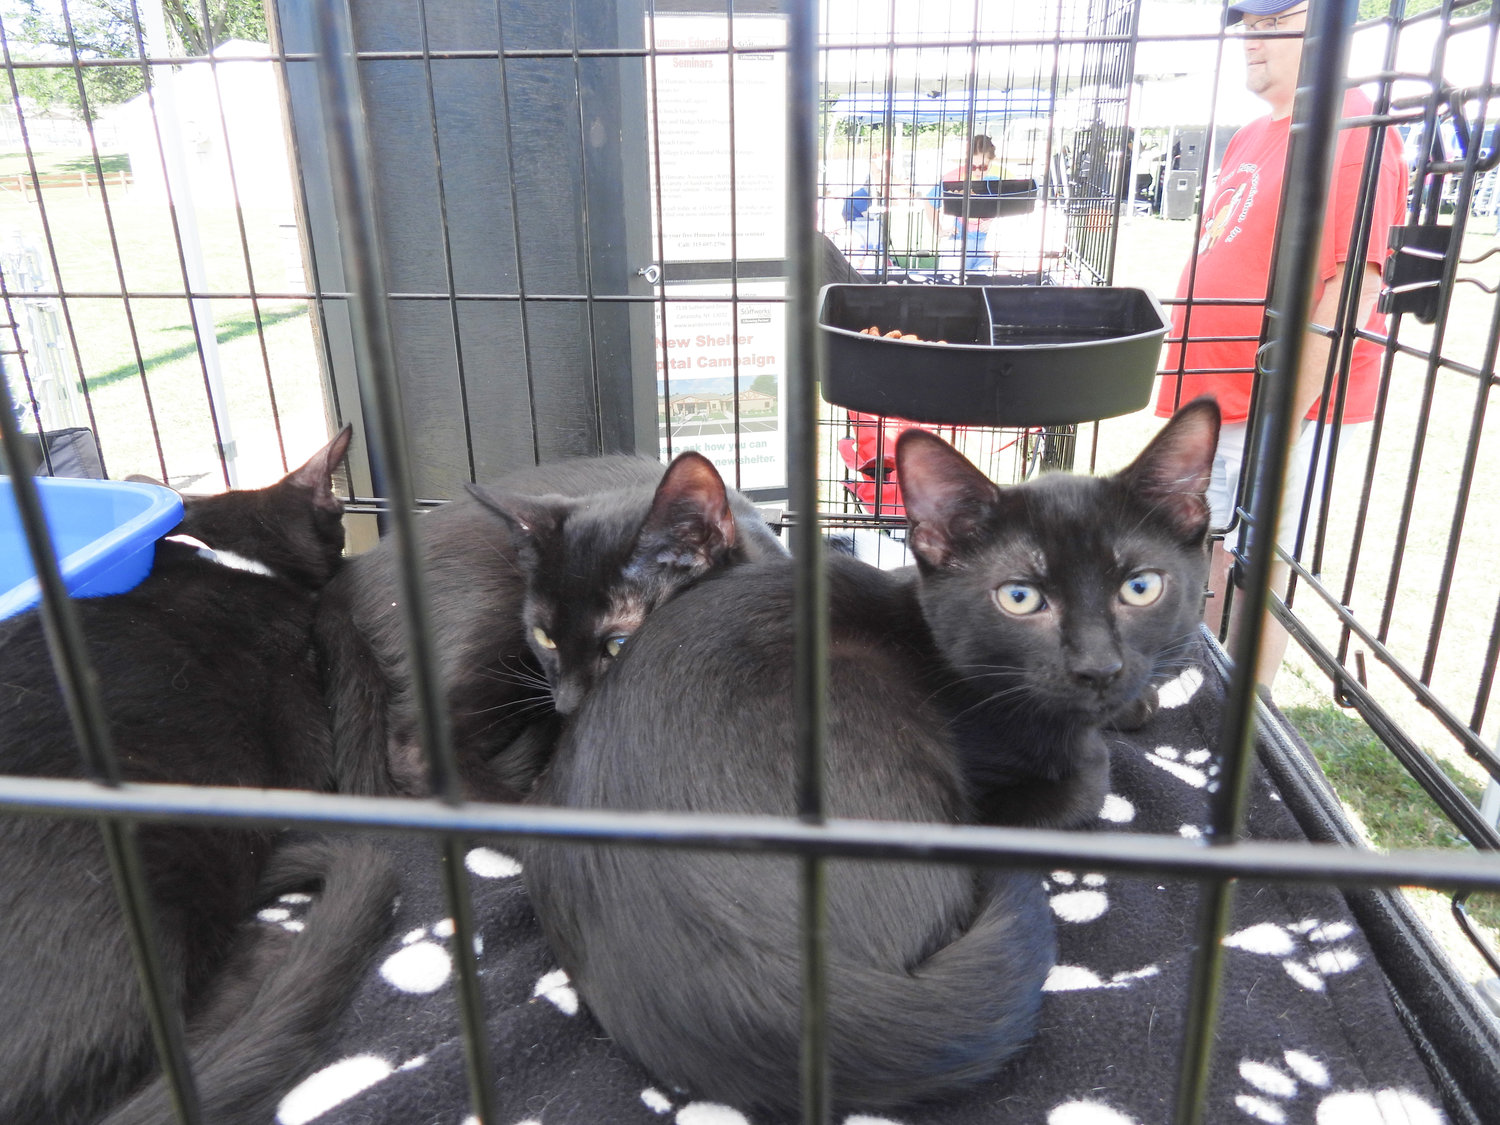 Three three-month-old kittens are up for adoption at Wanderers' Rest Human Association: Coal, Poppy, and Lunar. The three little kittens got a nap in while at Wanderers' Rest's 2022 Woofstock fundraiser on Saturday, Aug. 13.